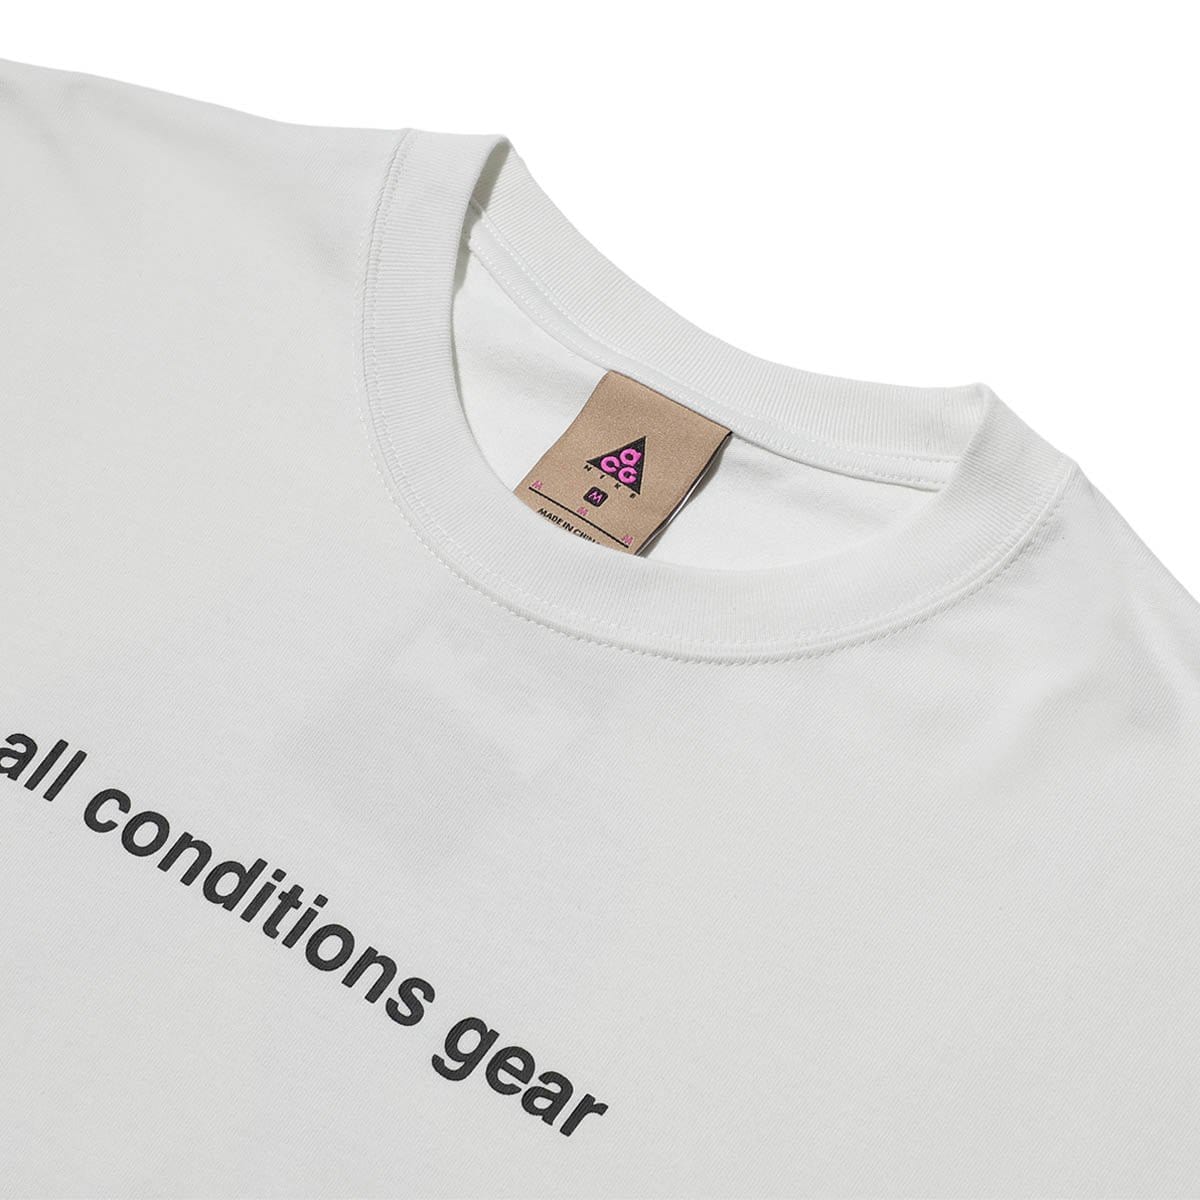 all conditions gear shirt